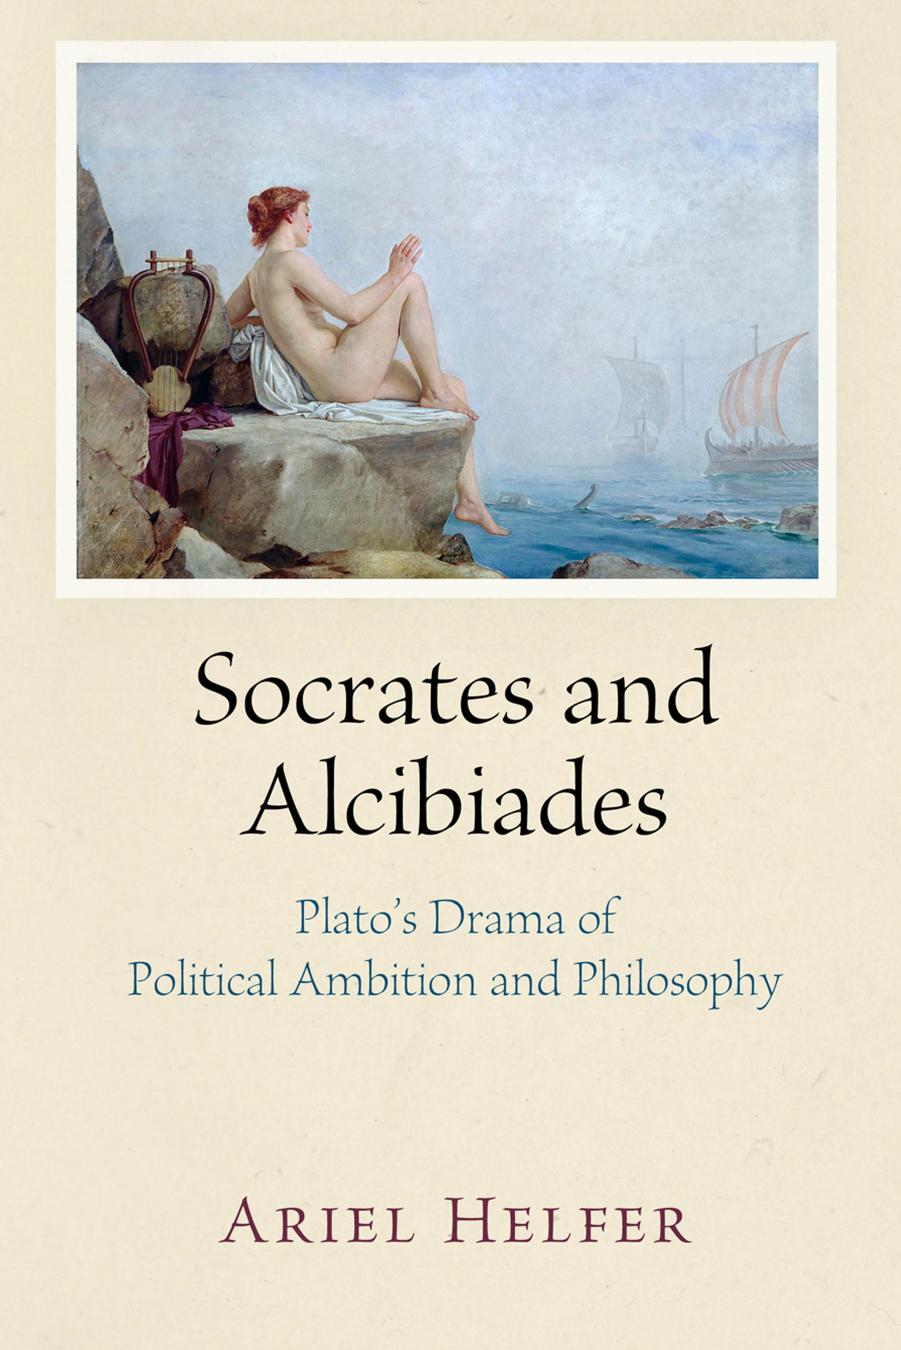 Socrates and Alcibiades: Plato's Drama of Political Ambition and Philosophy